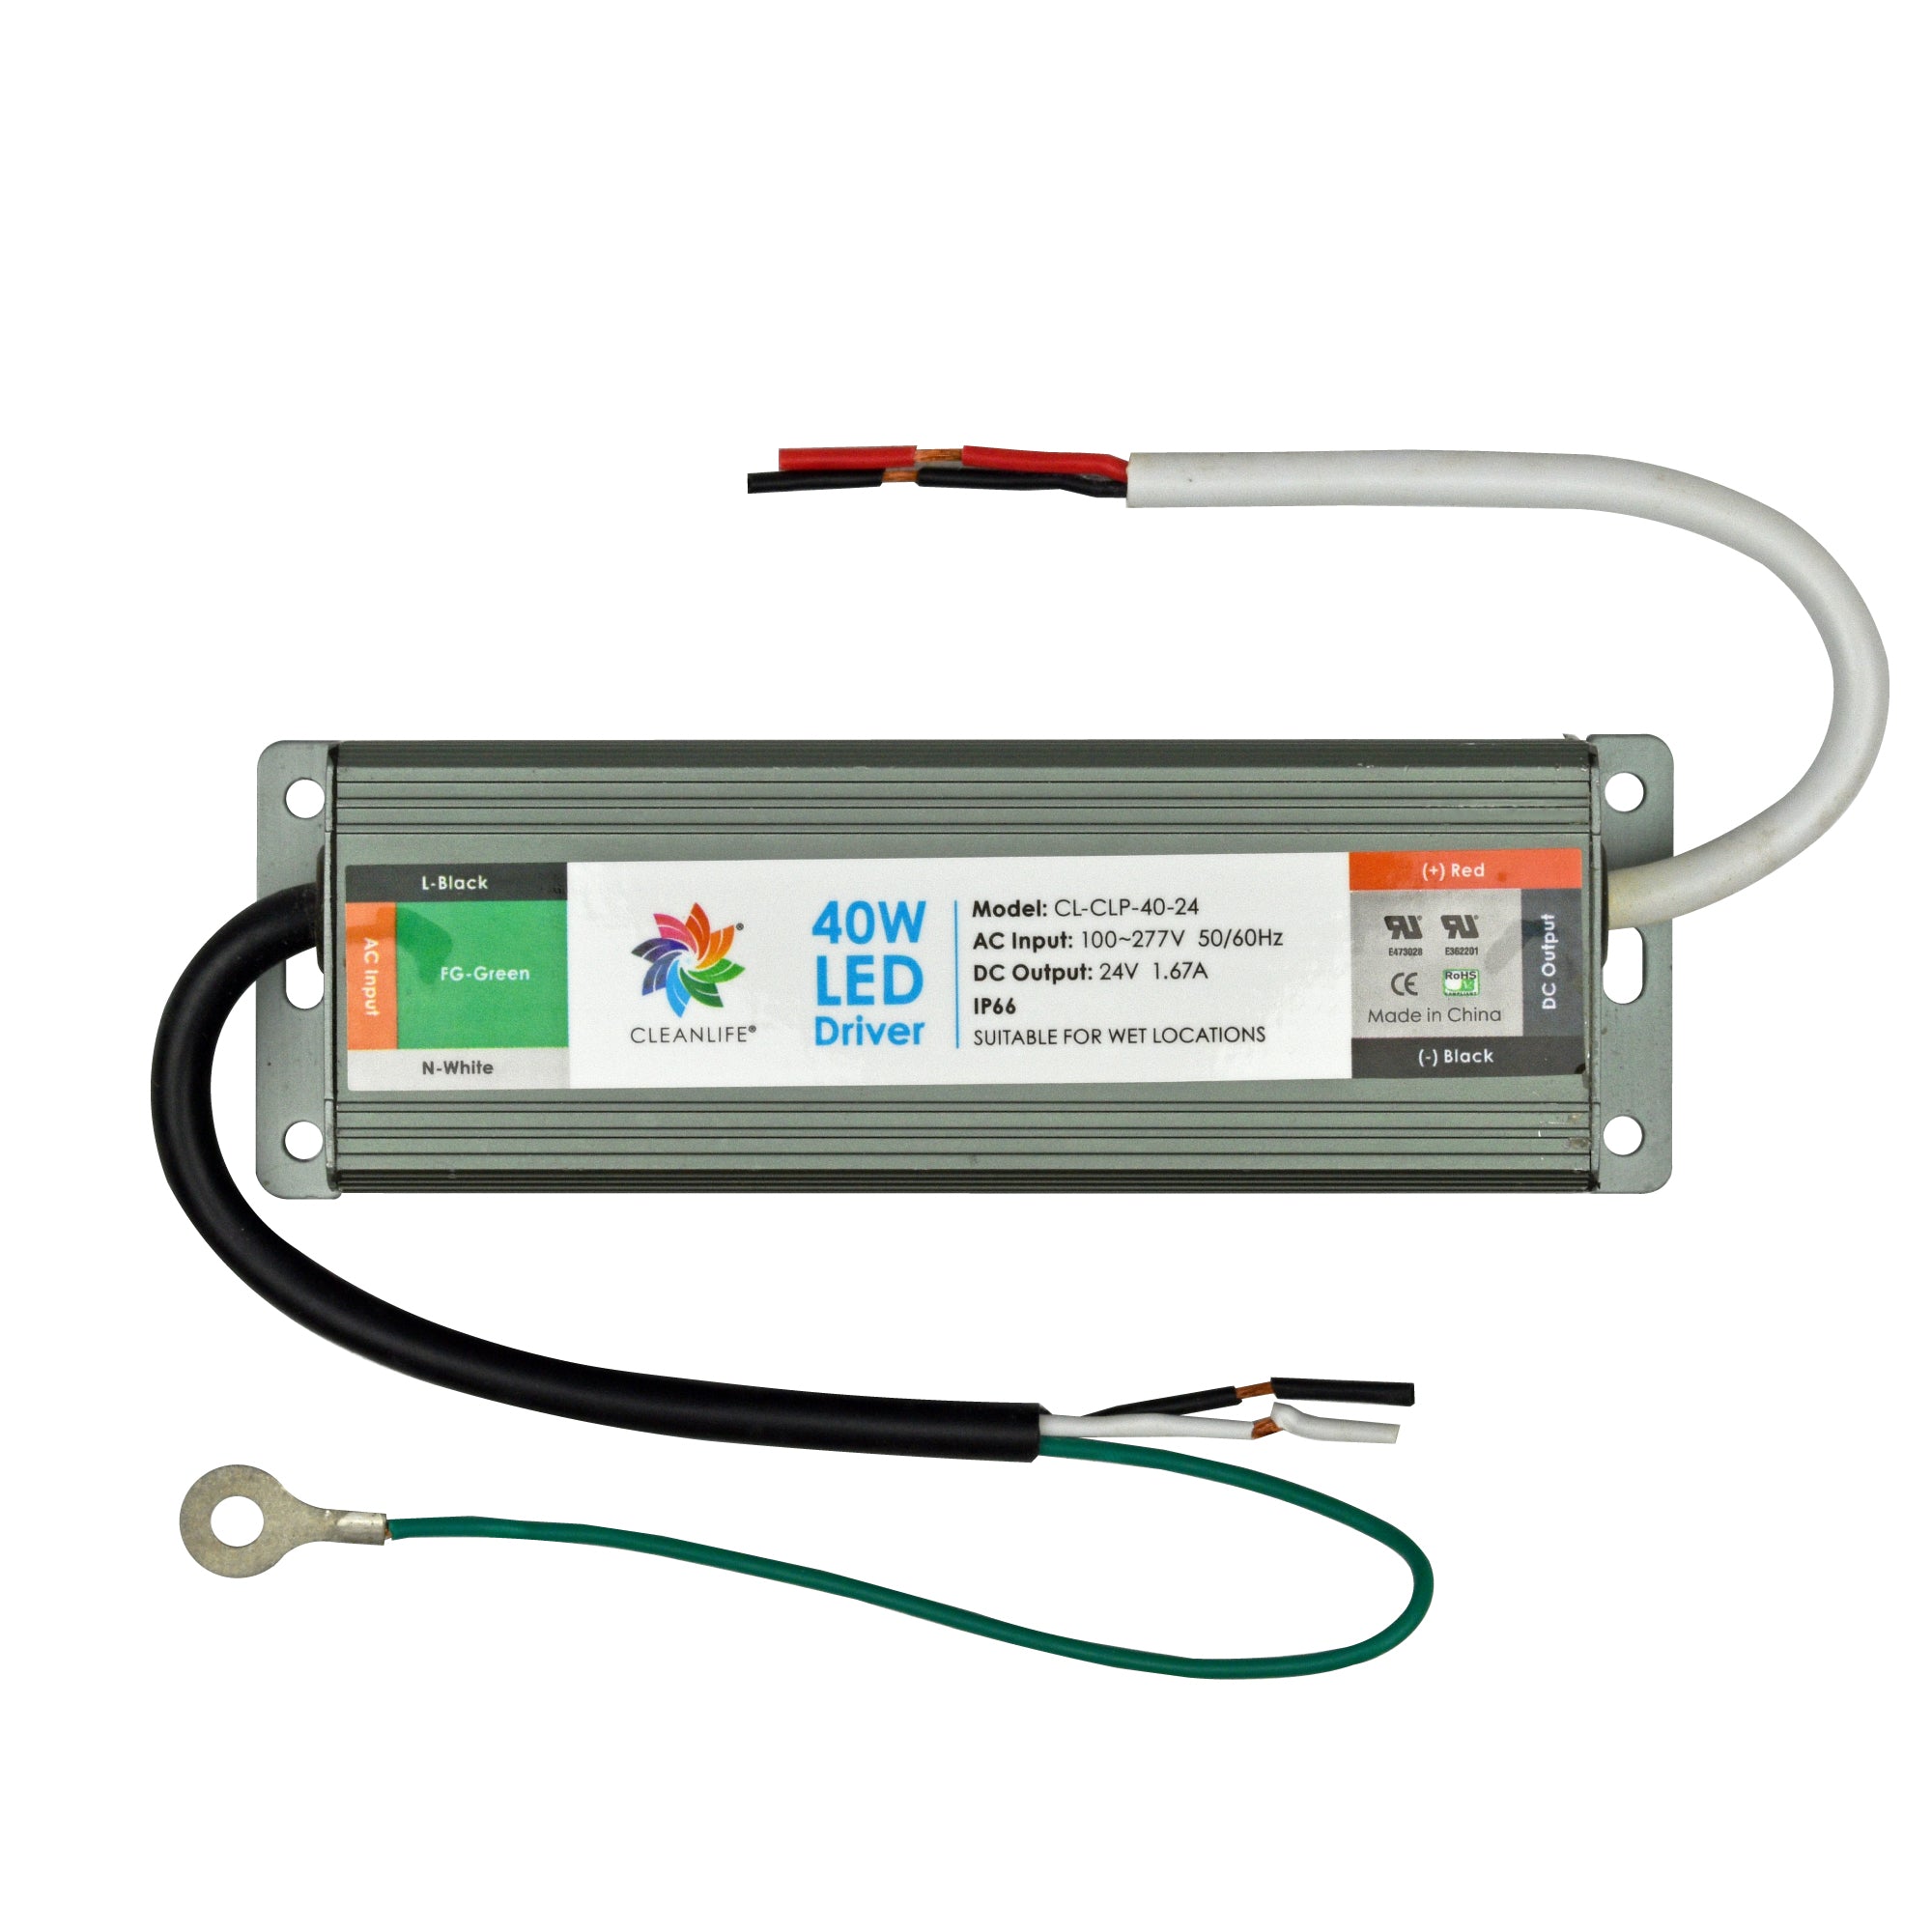 CLEANLIFE® CL-CLP-40 LED Driver 24V 40W IP66